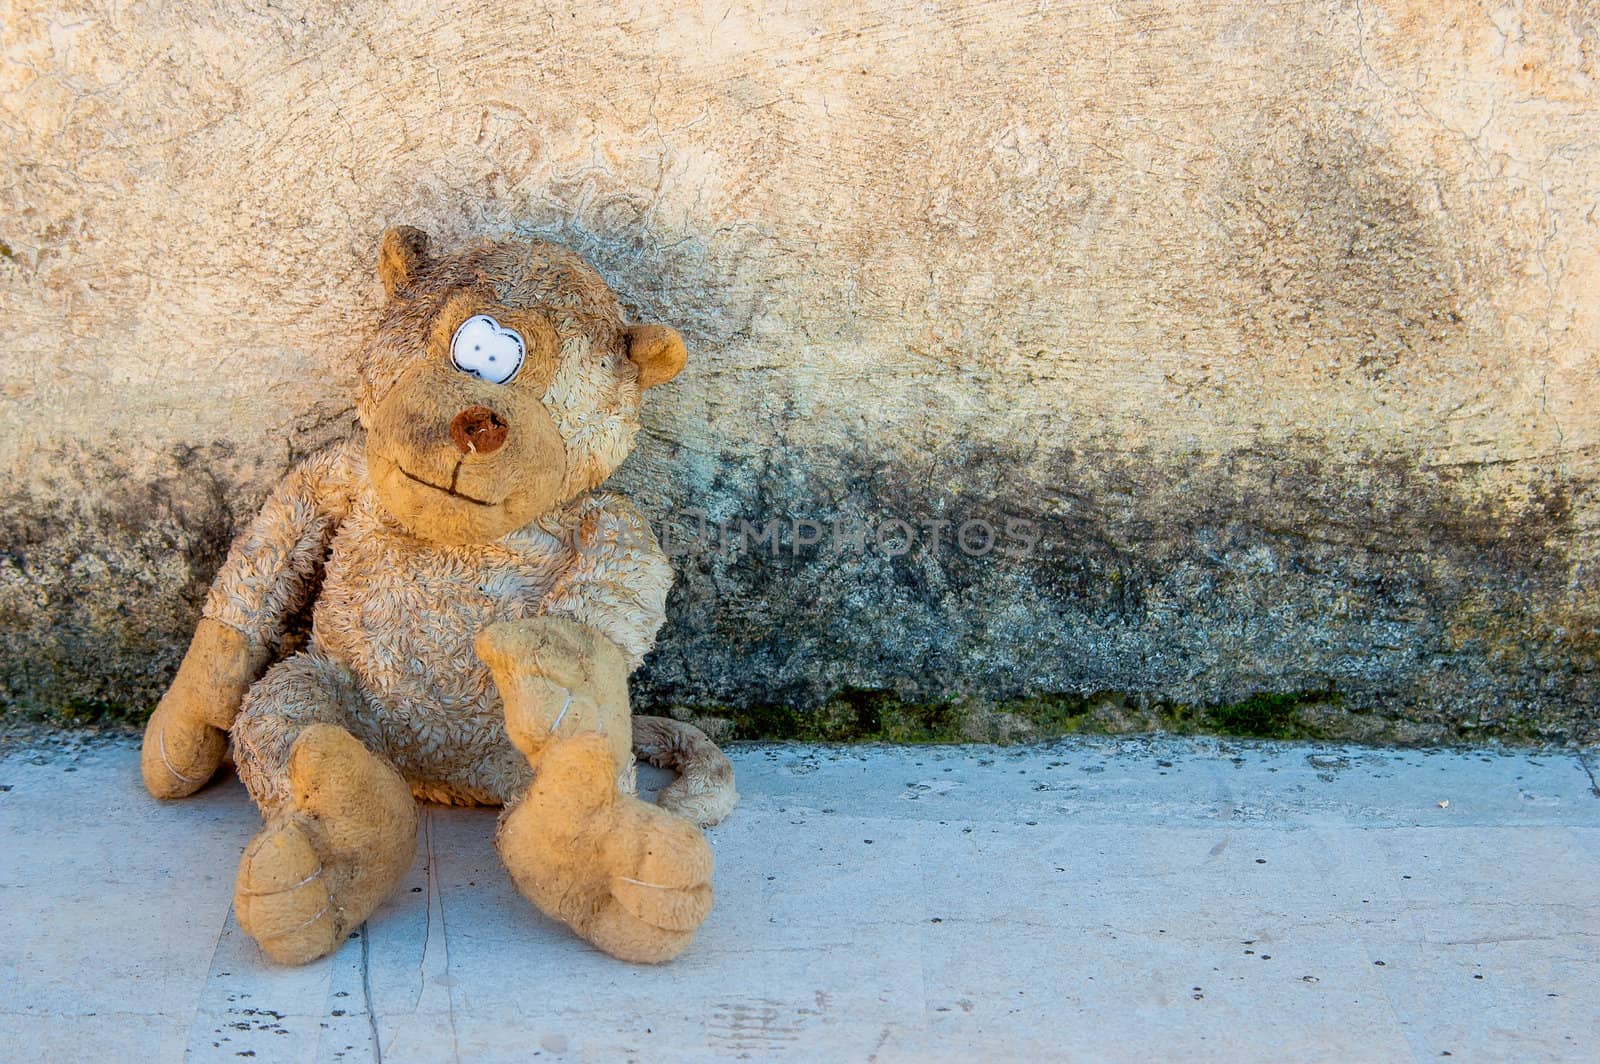 A dirty and old teddy bear by saap585